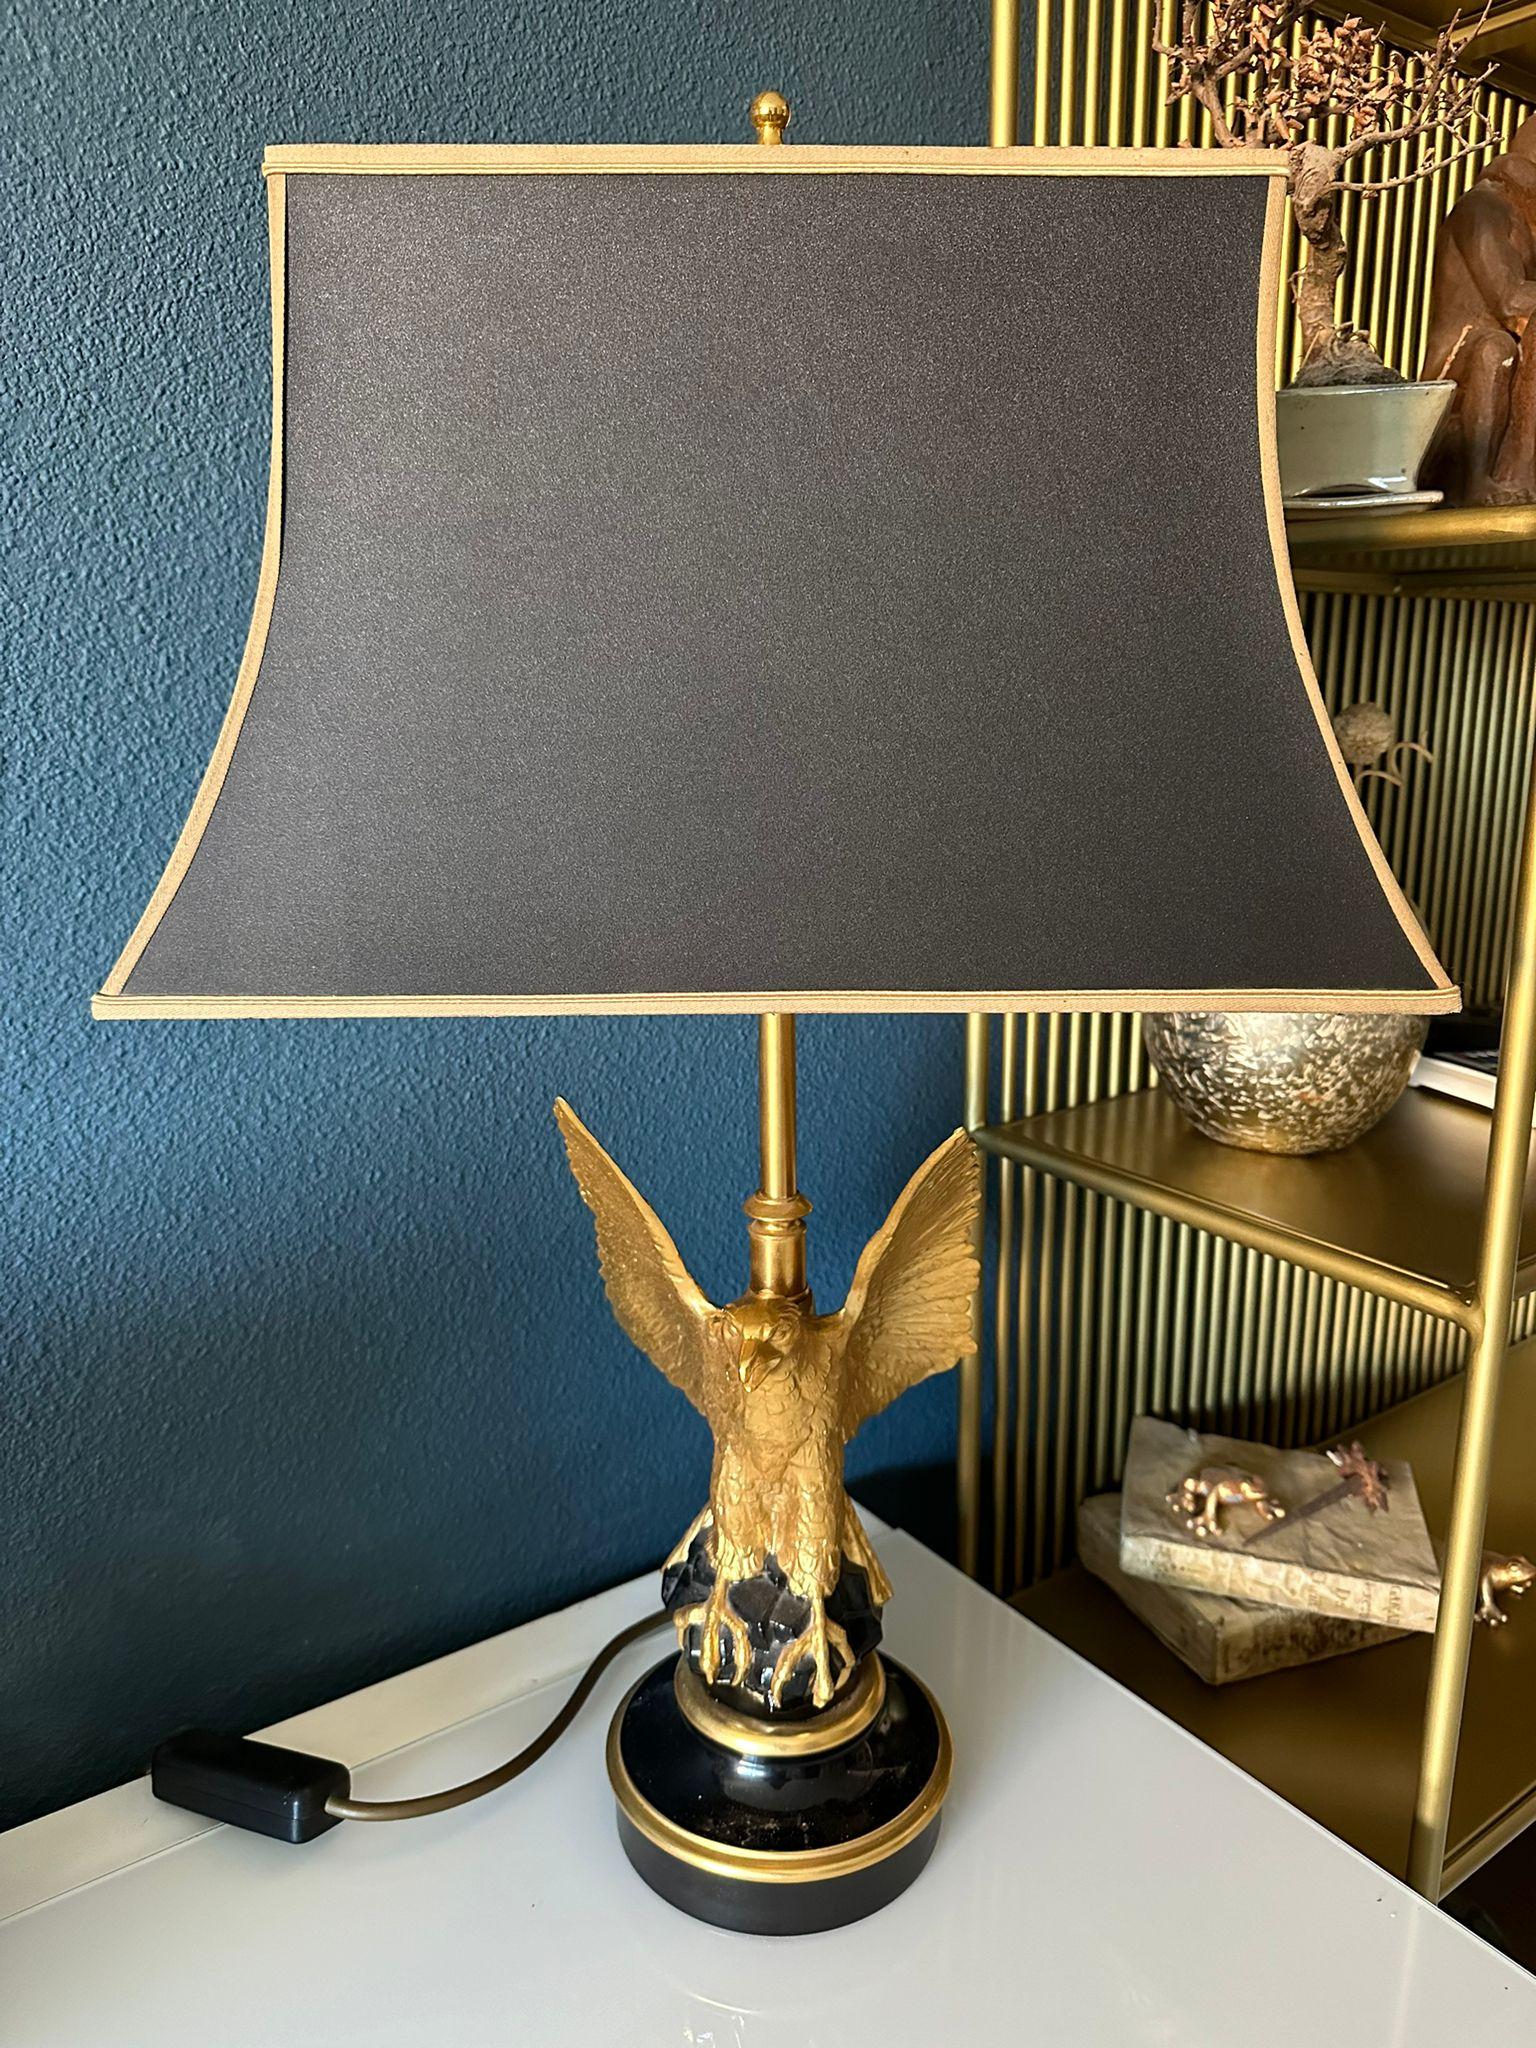 Maison Charles mood lamp, circa 1970, 20th century.
gilt brass barrel depicting an eagle on black lacquered circular base, pagoda-shaped lampshade, 3-bulb ignition, 
Measures: H: 75, W: 46, D: 75 cm
Good condition.